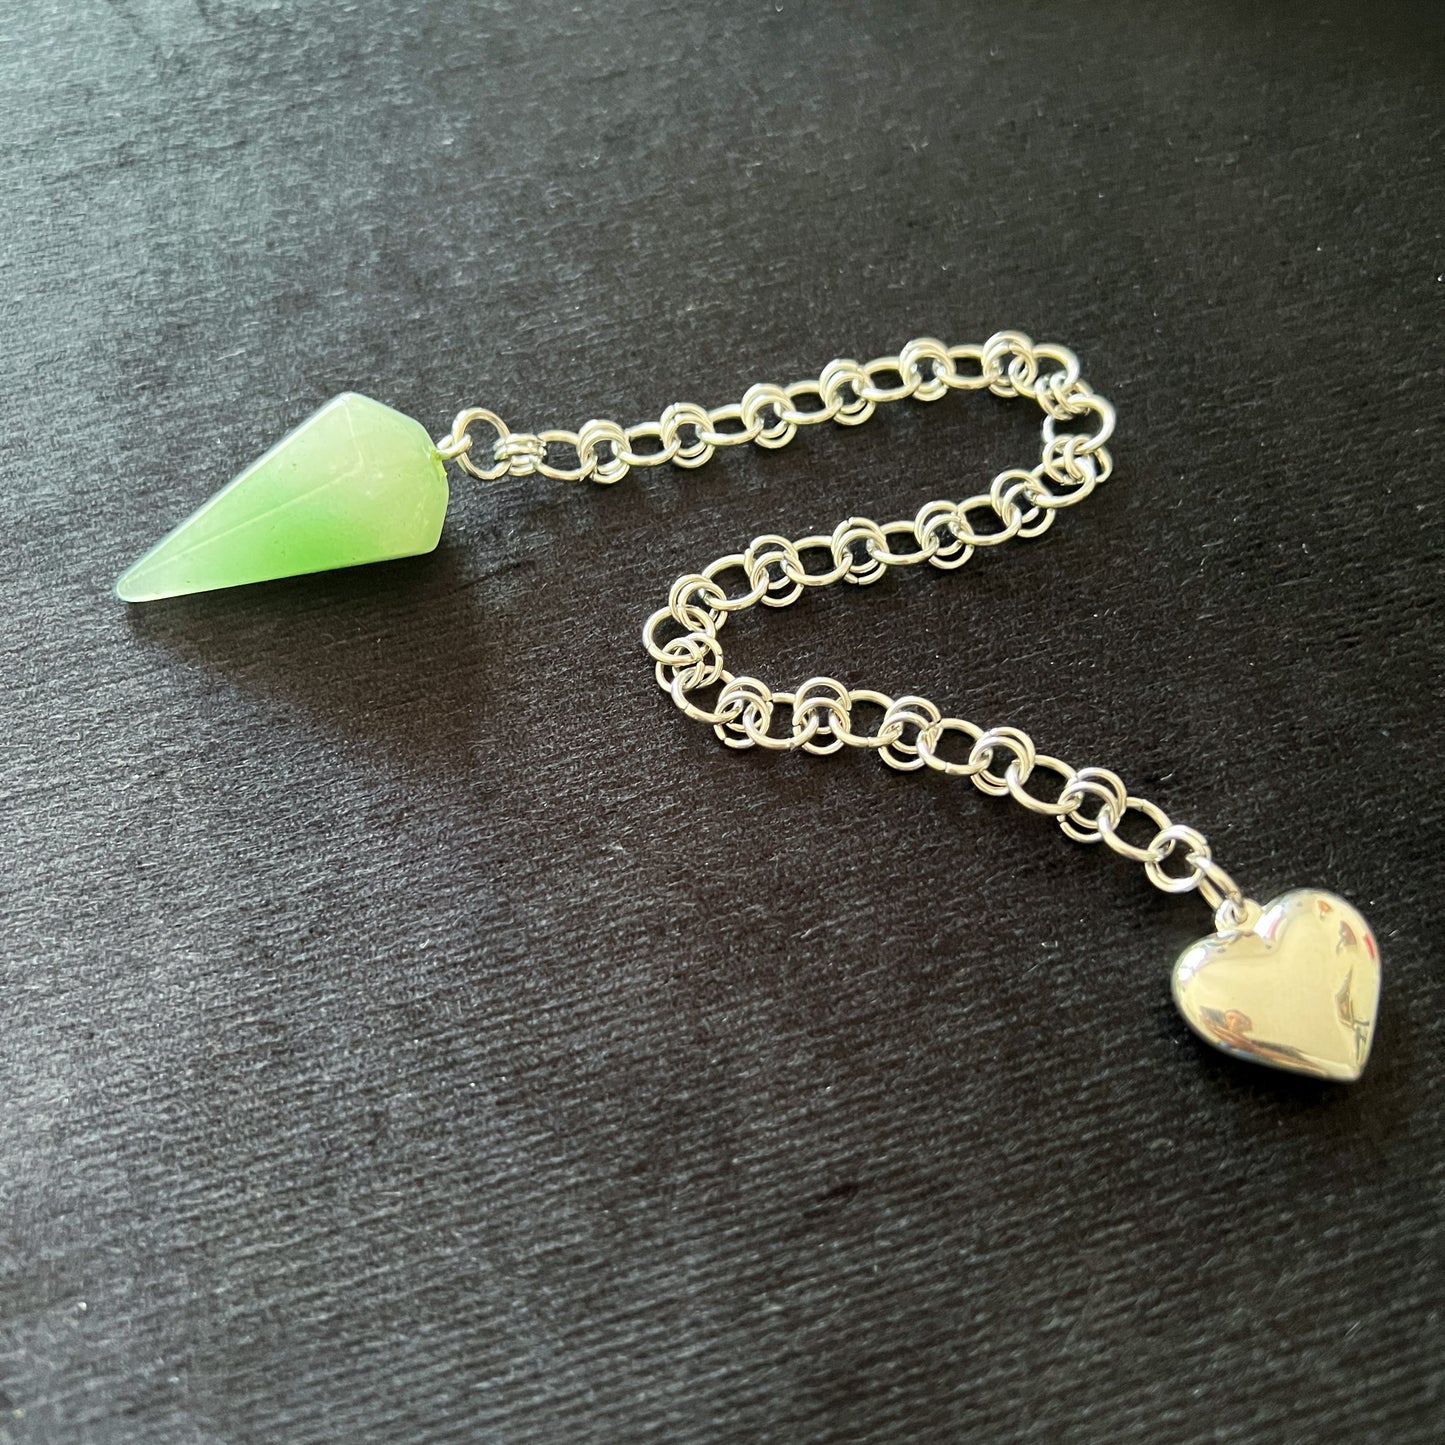 Aventurine and puffy heart dowsing pendulum gemstone and stainless steel witchy cute divination tool